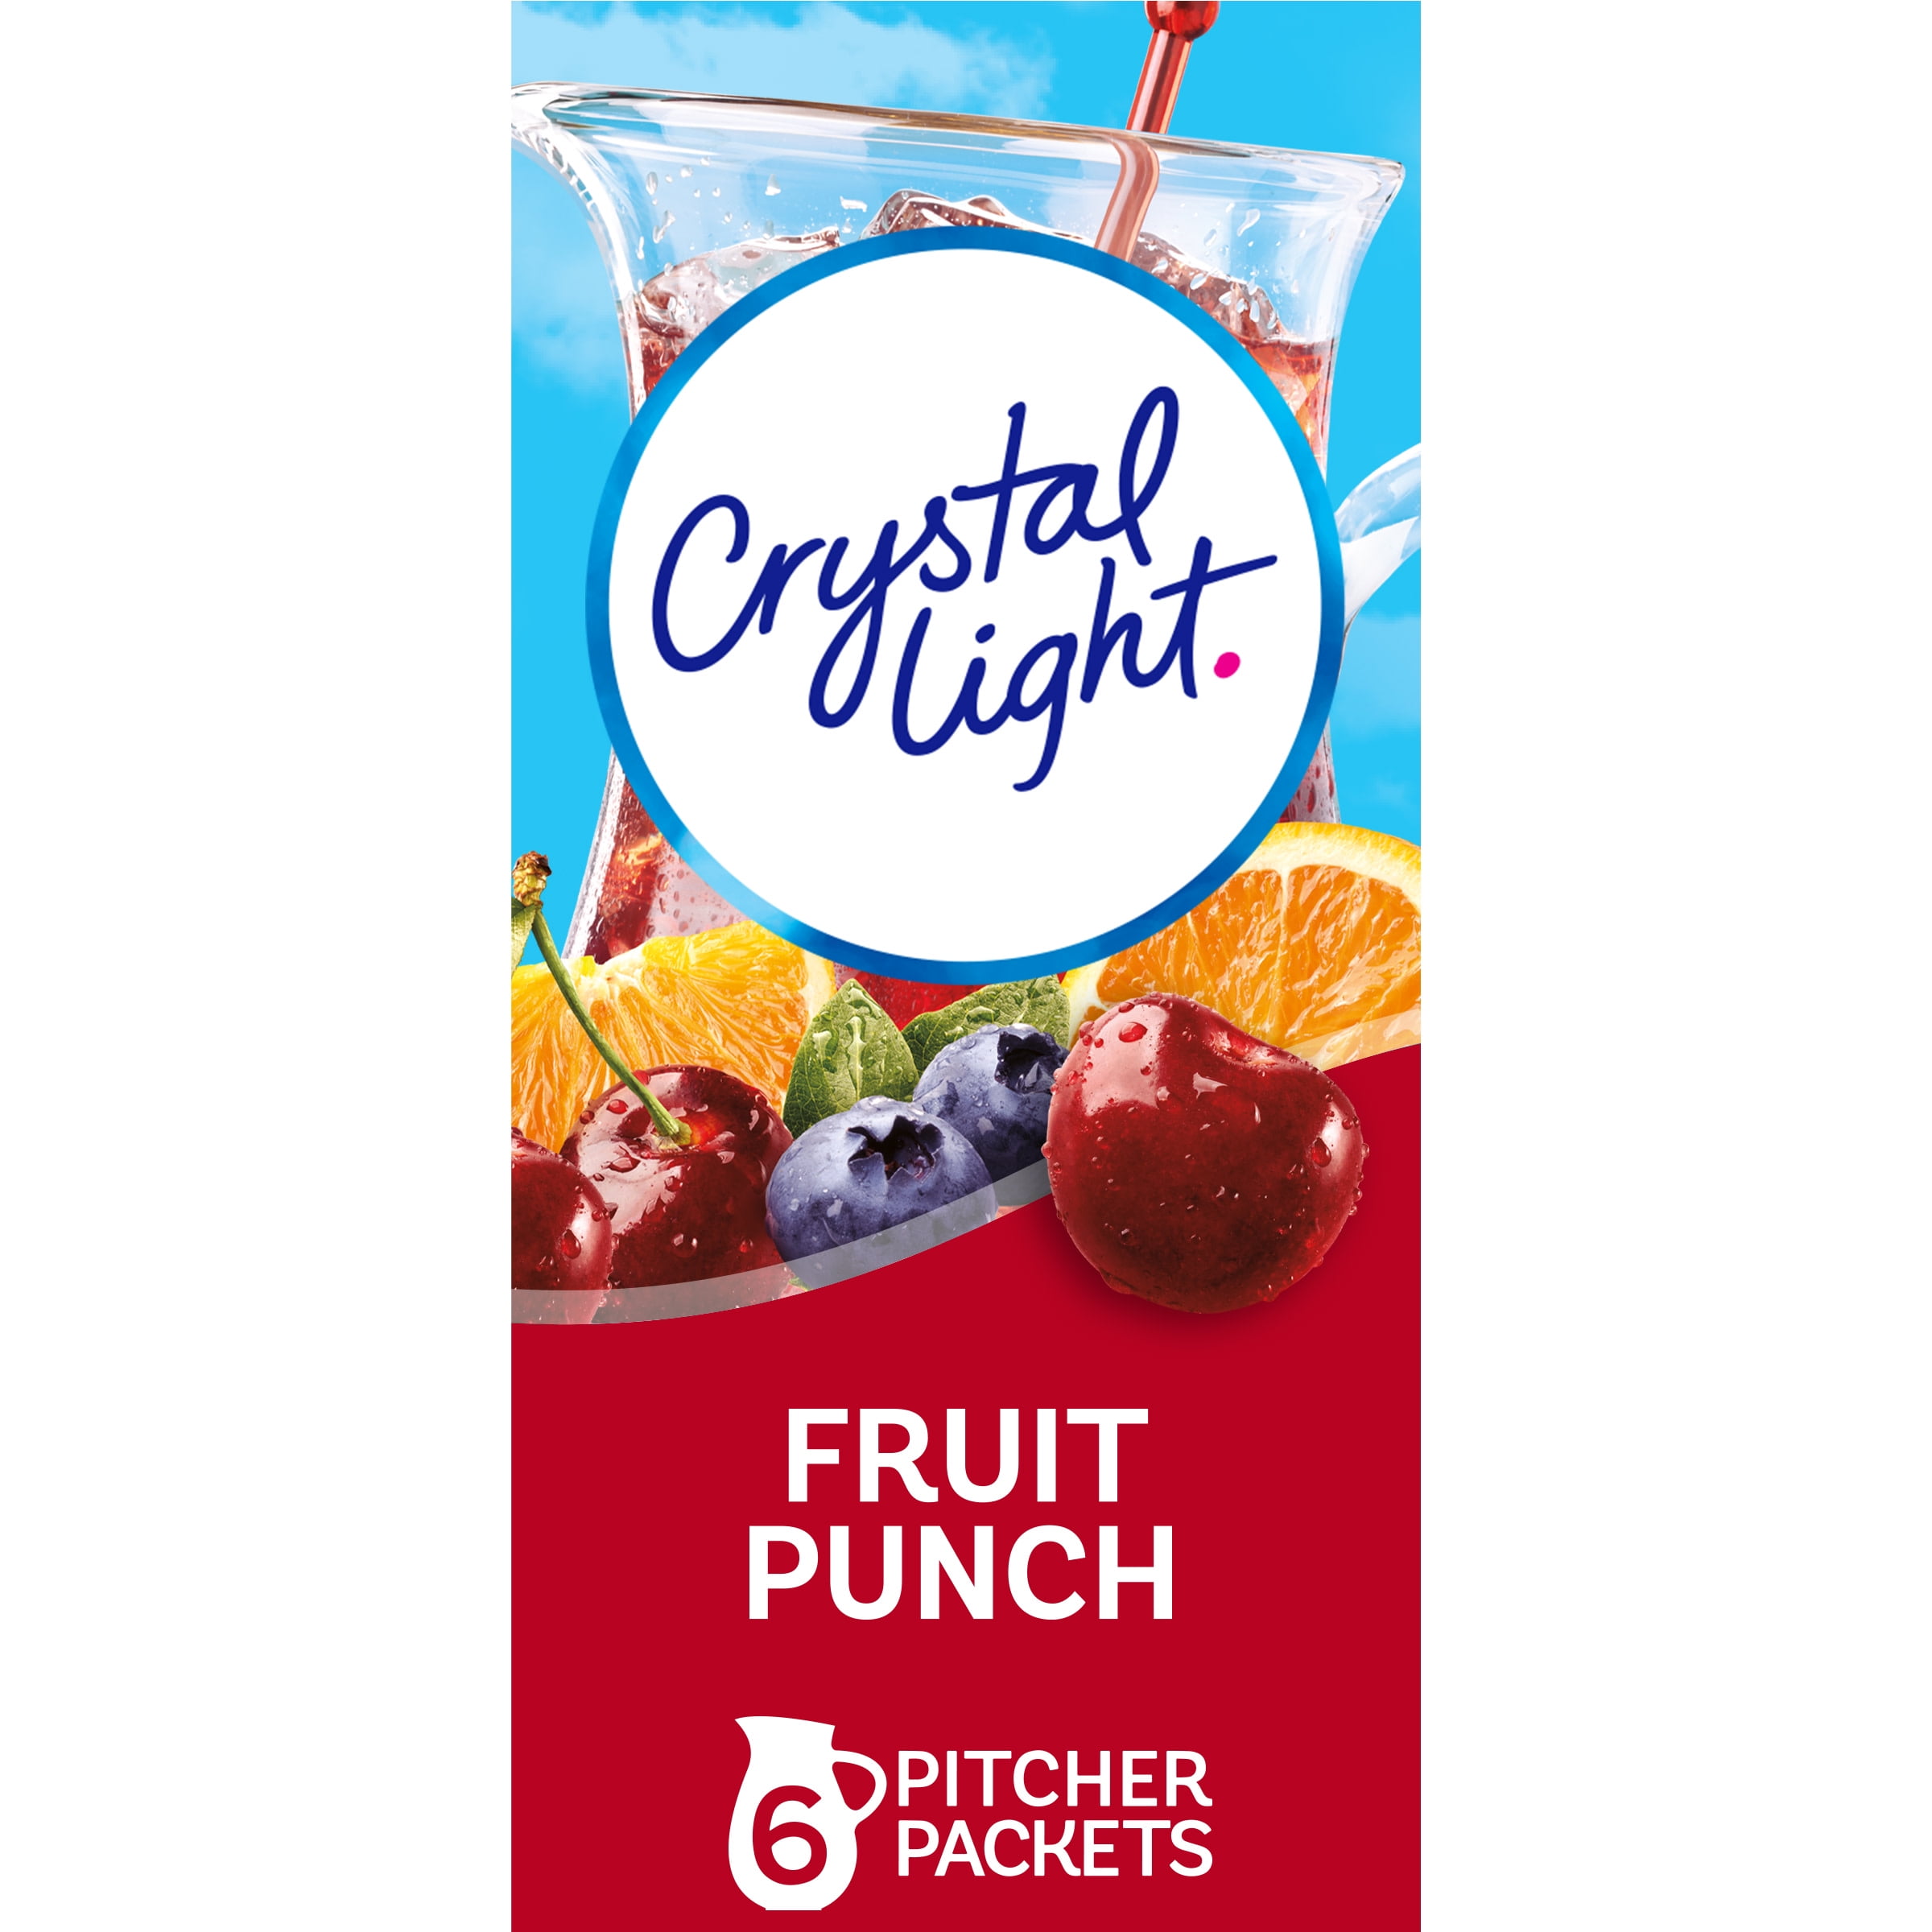 Crystal Light Fruit Punch Sugar Free Drink Mix Caffeine Free, 6 ct Pitcher Packets